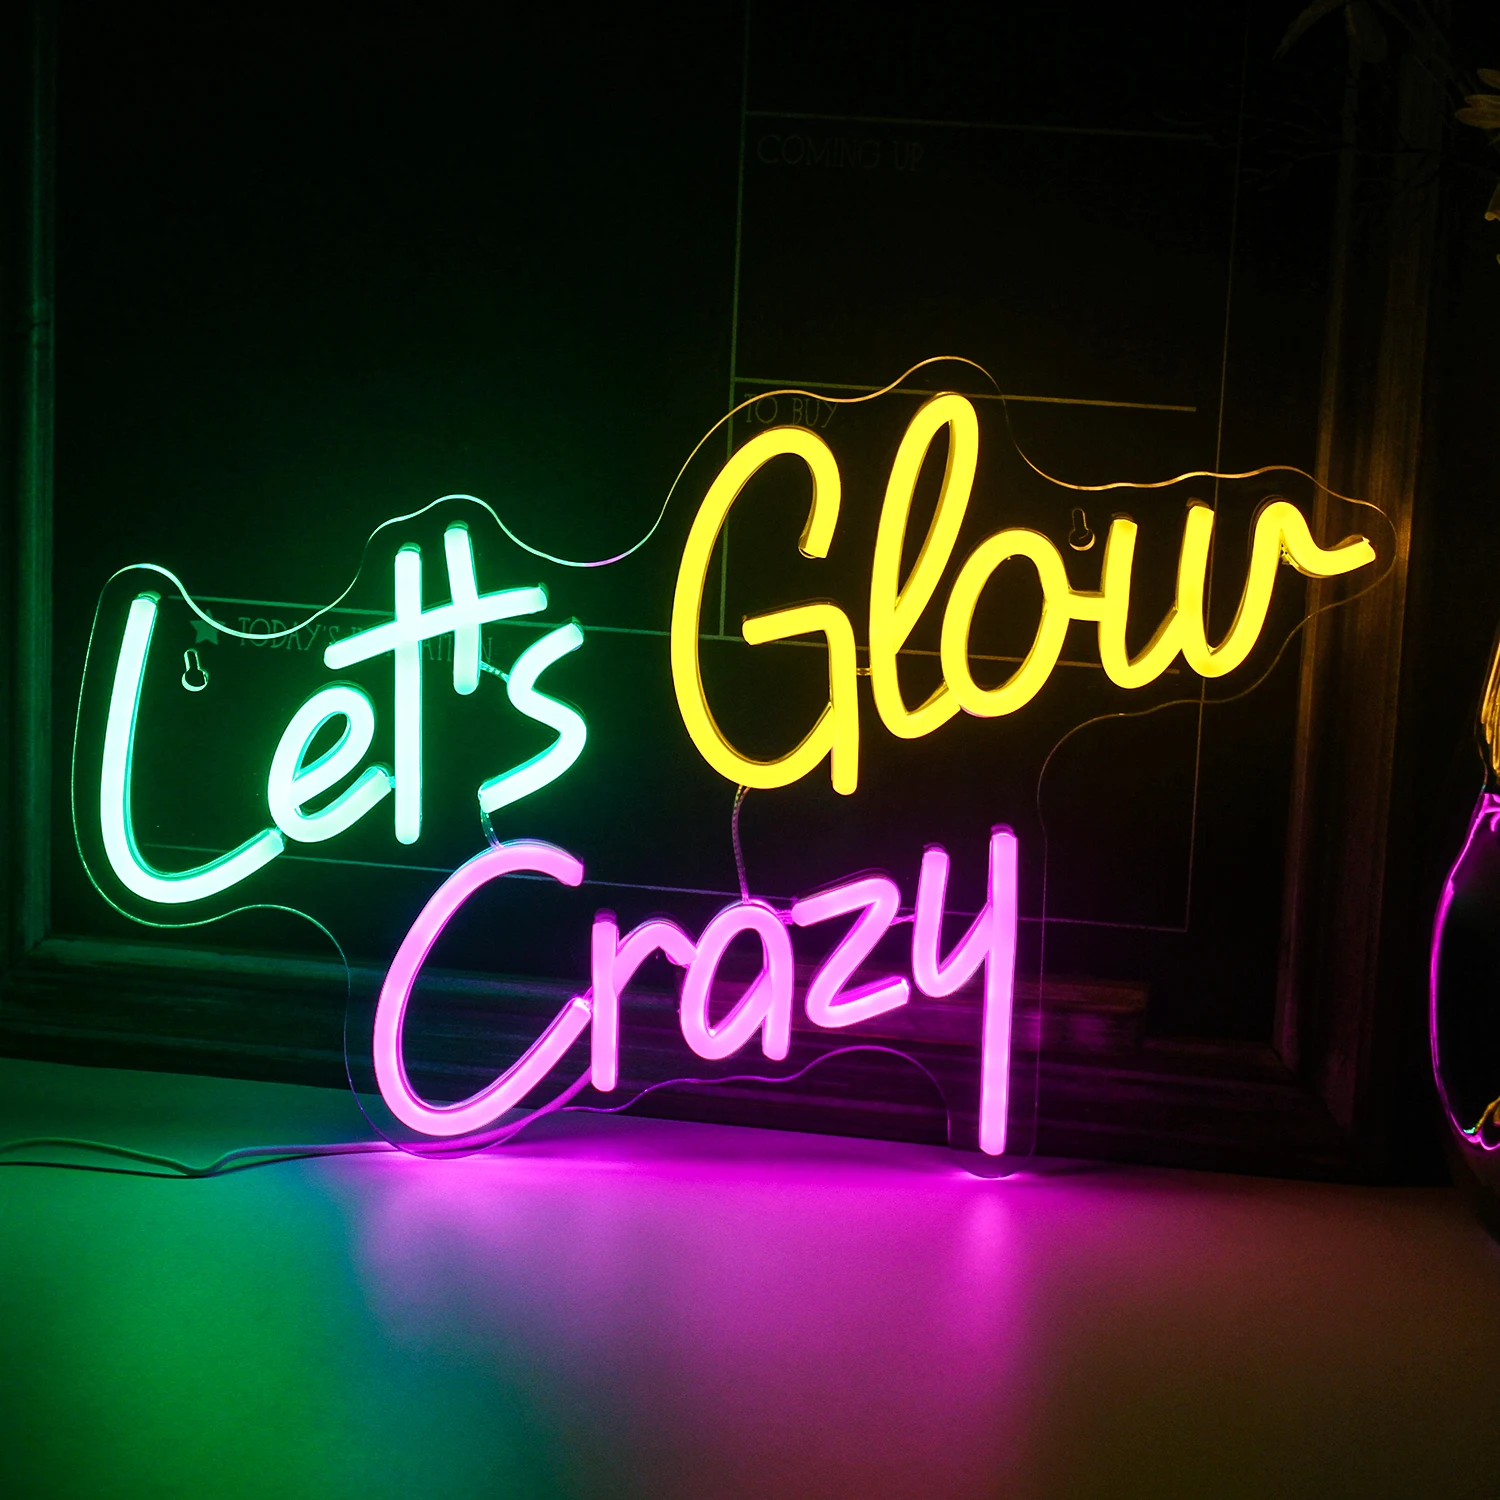 

Let's Glow Crazy Neon Sign Led Light Personalized For Bedroom Home Art Bar Pub Birthday Wedding Party Aesthetic Wall Decor Gift